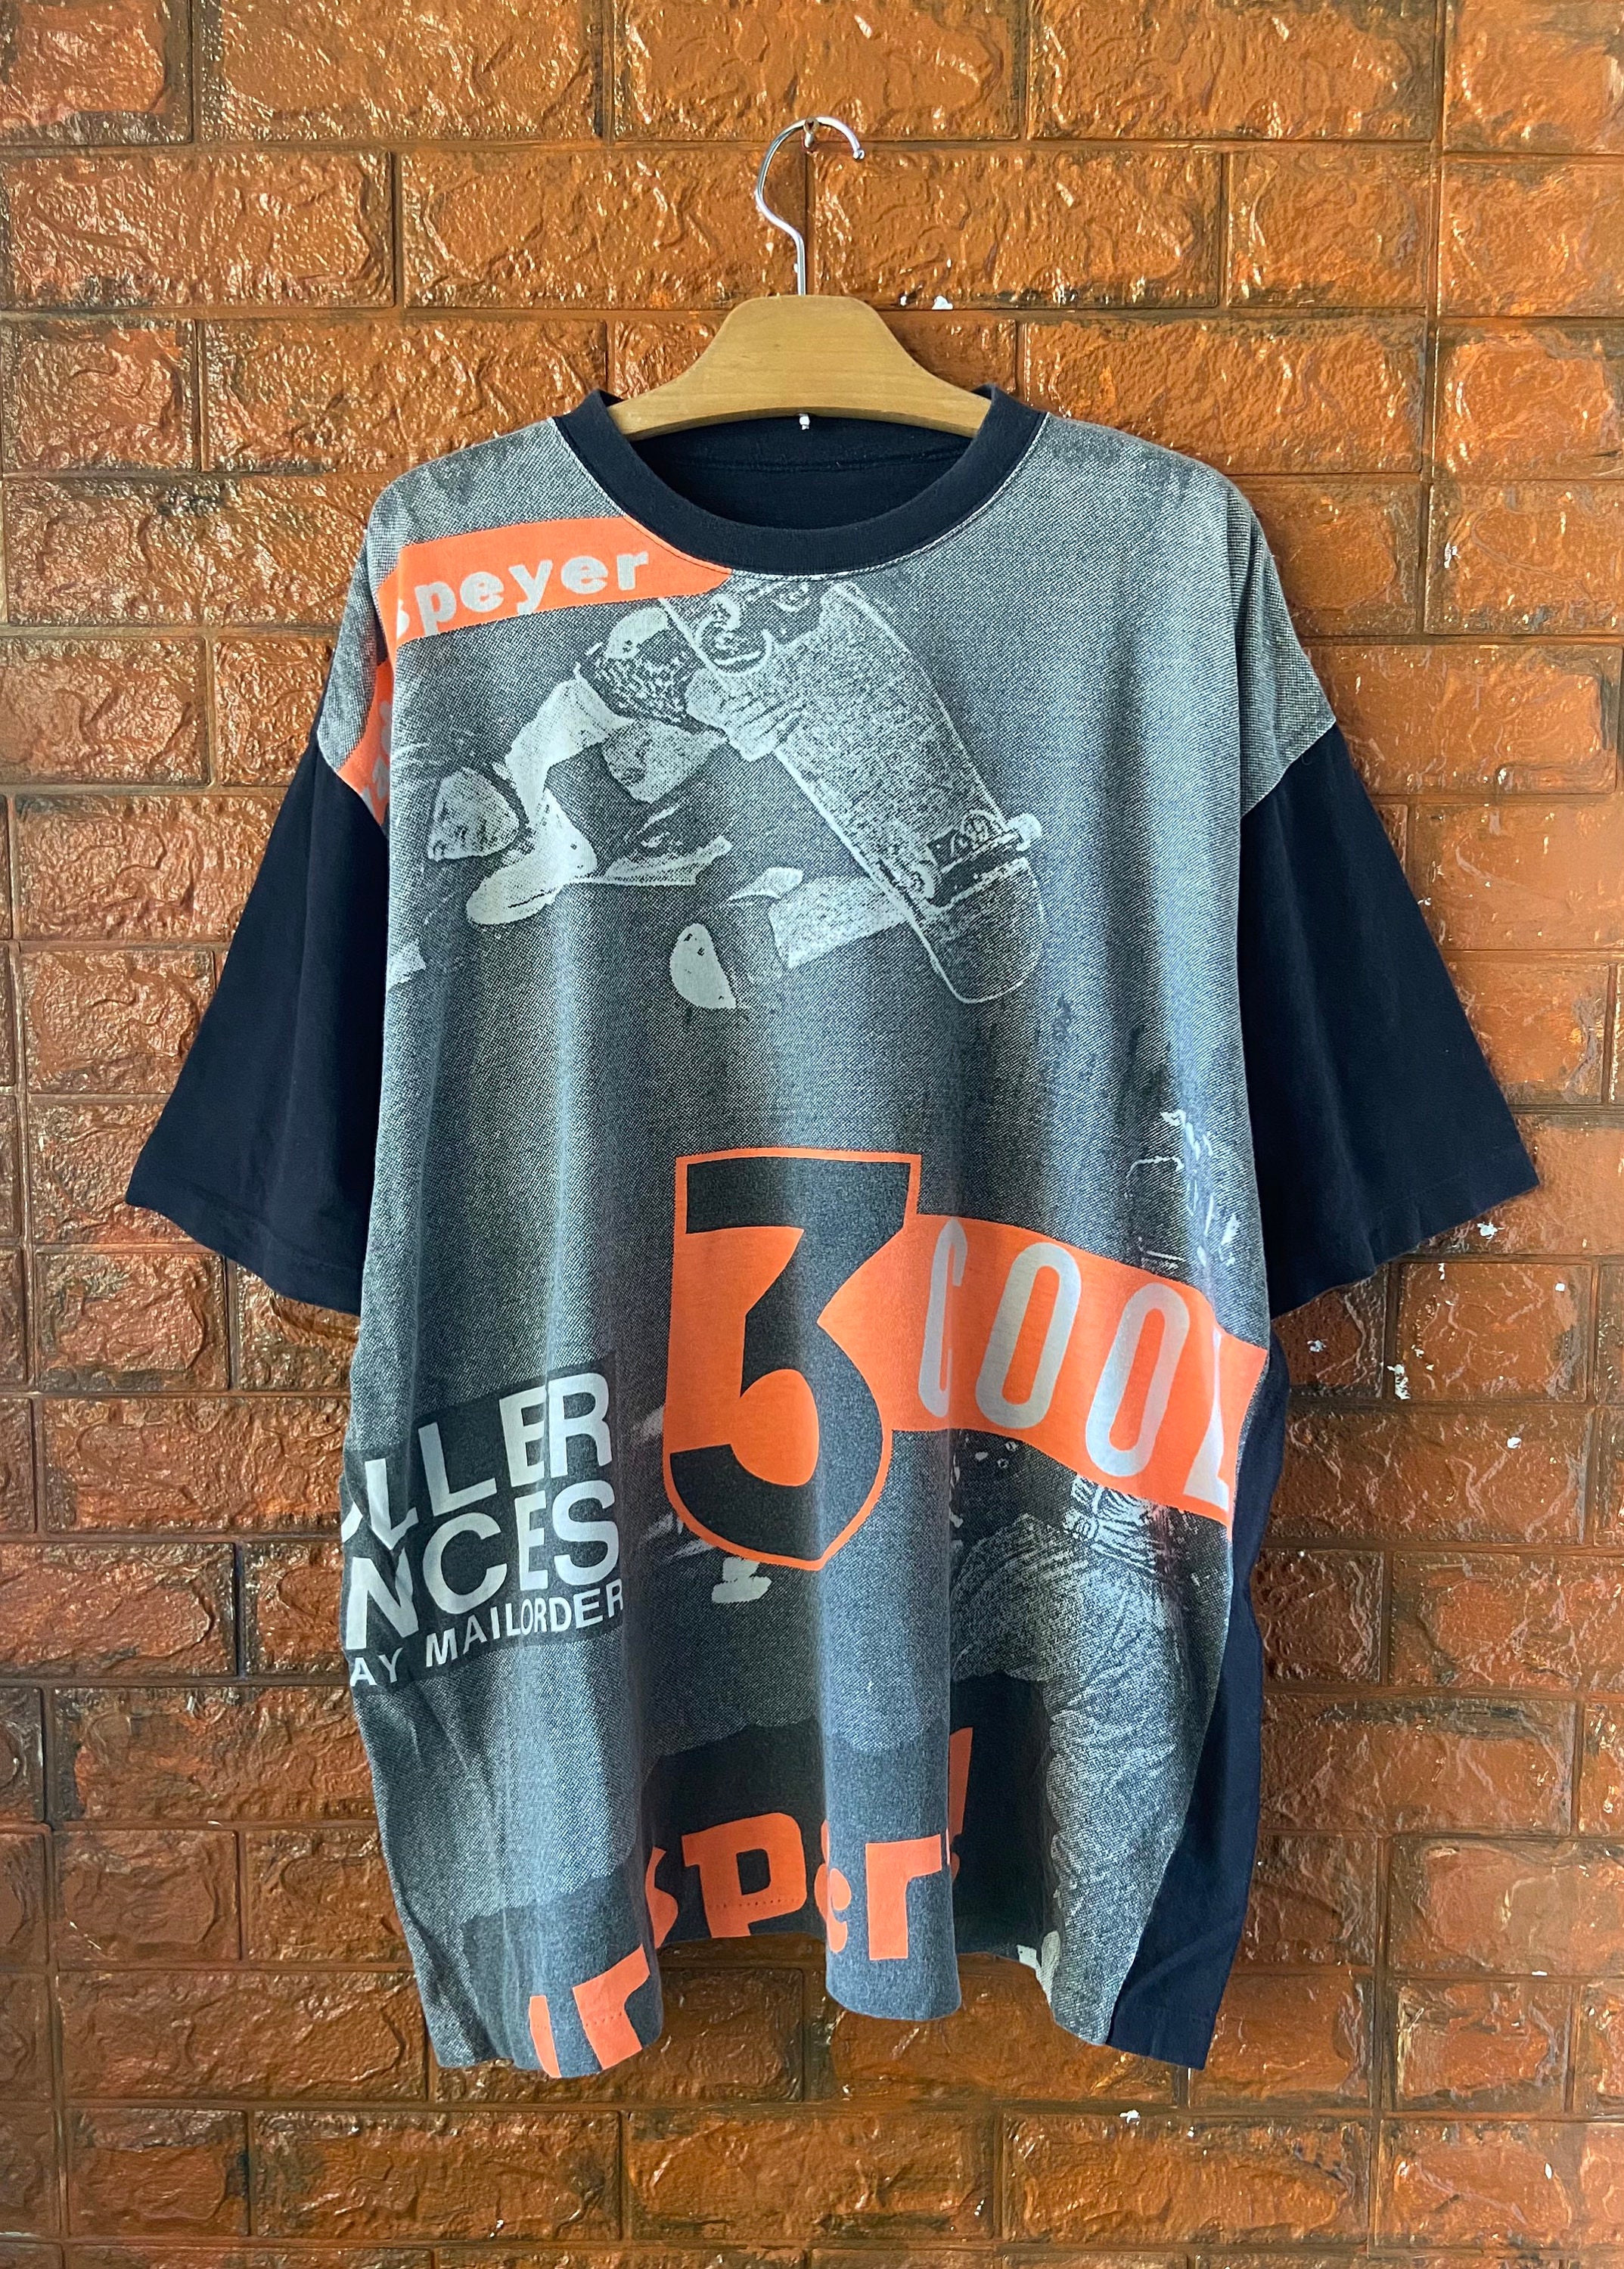 BOYS PURE COTTON BLACK SKATER PRINT T-SHIRT IN AGE 13 YEARS BNWT 